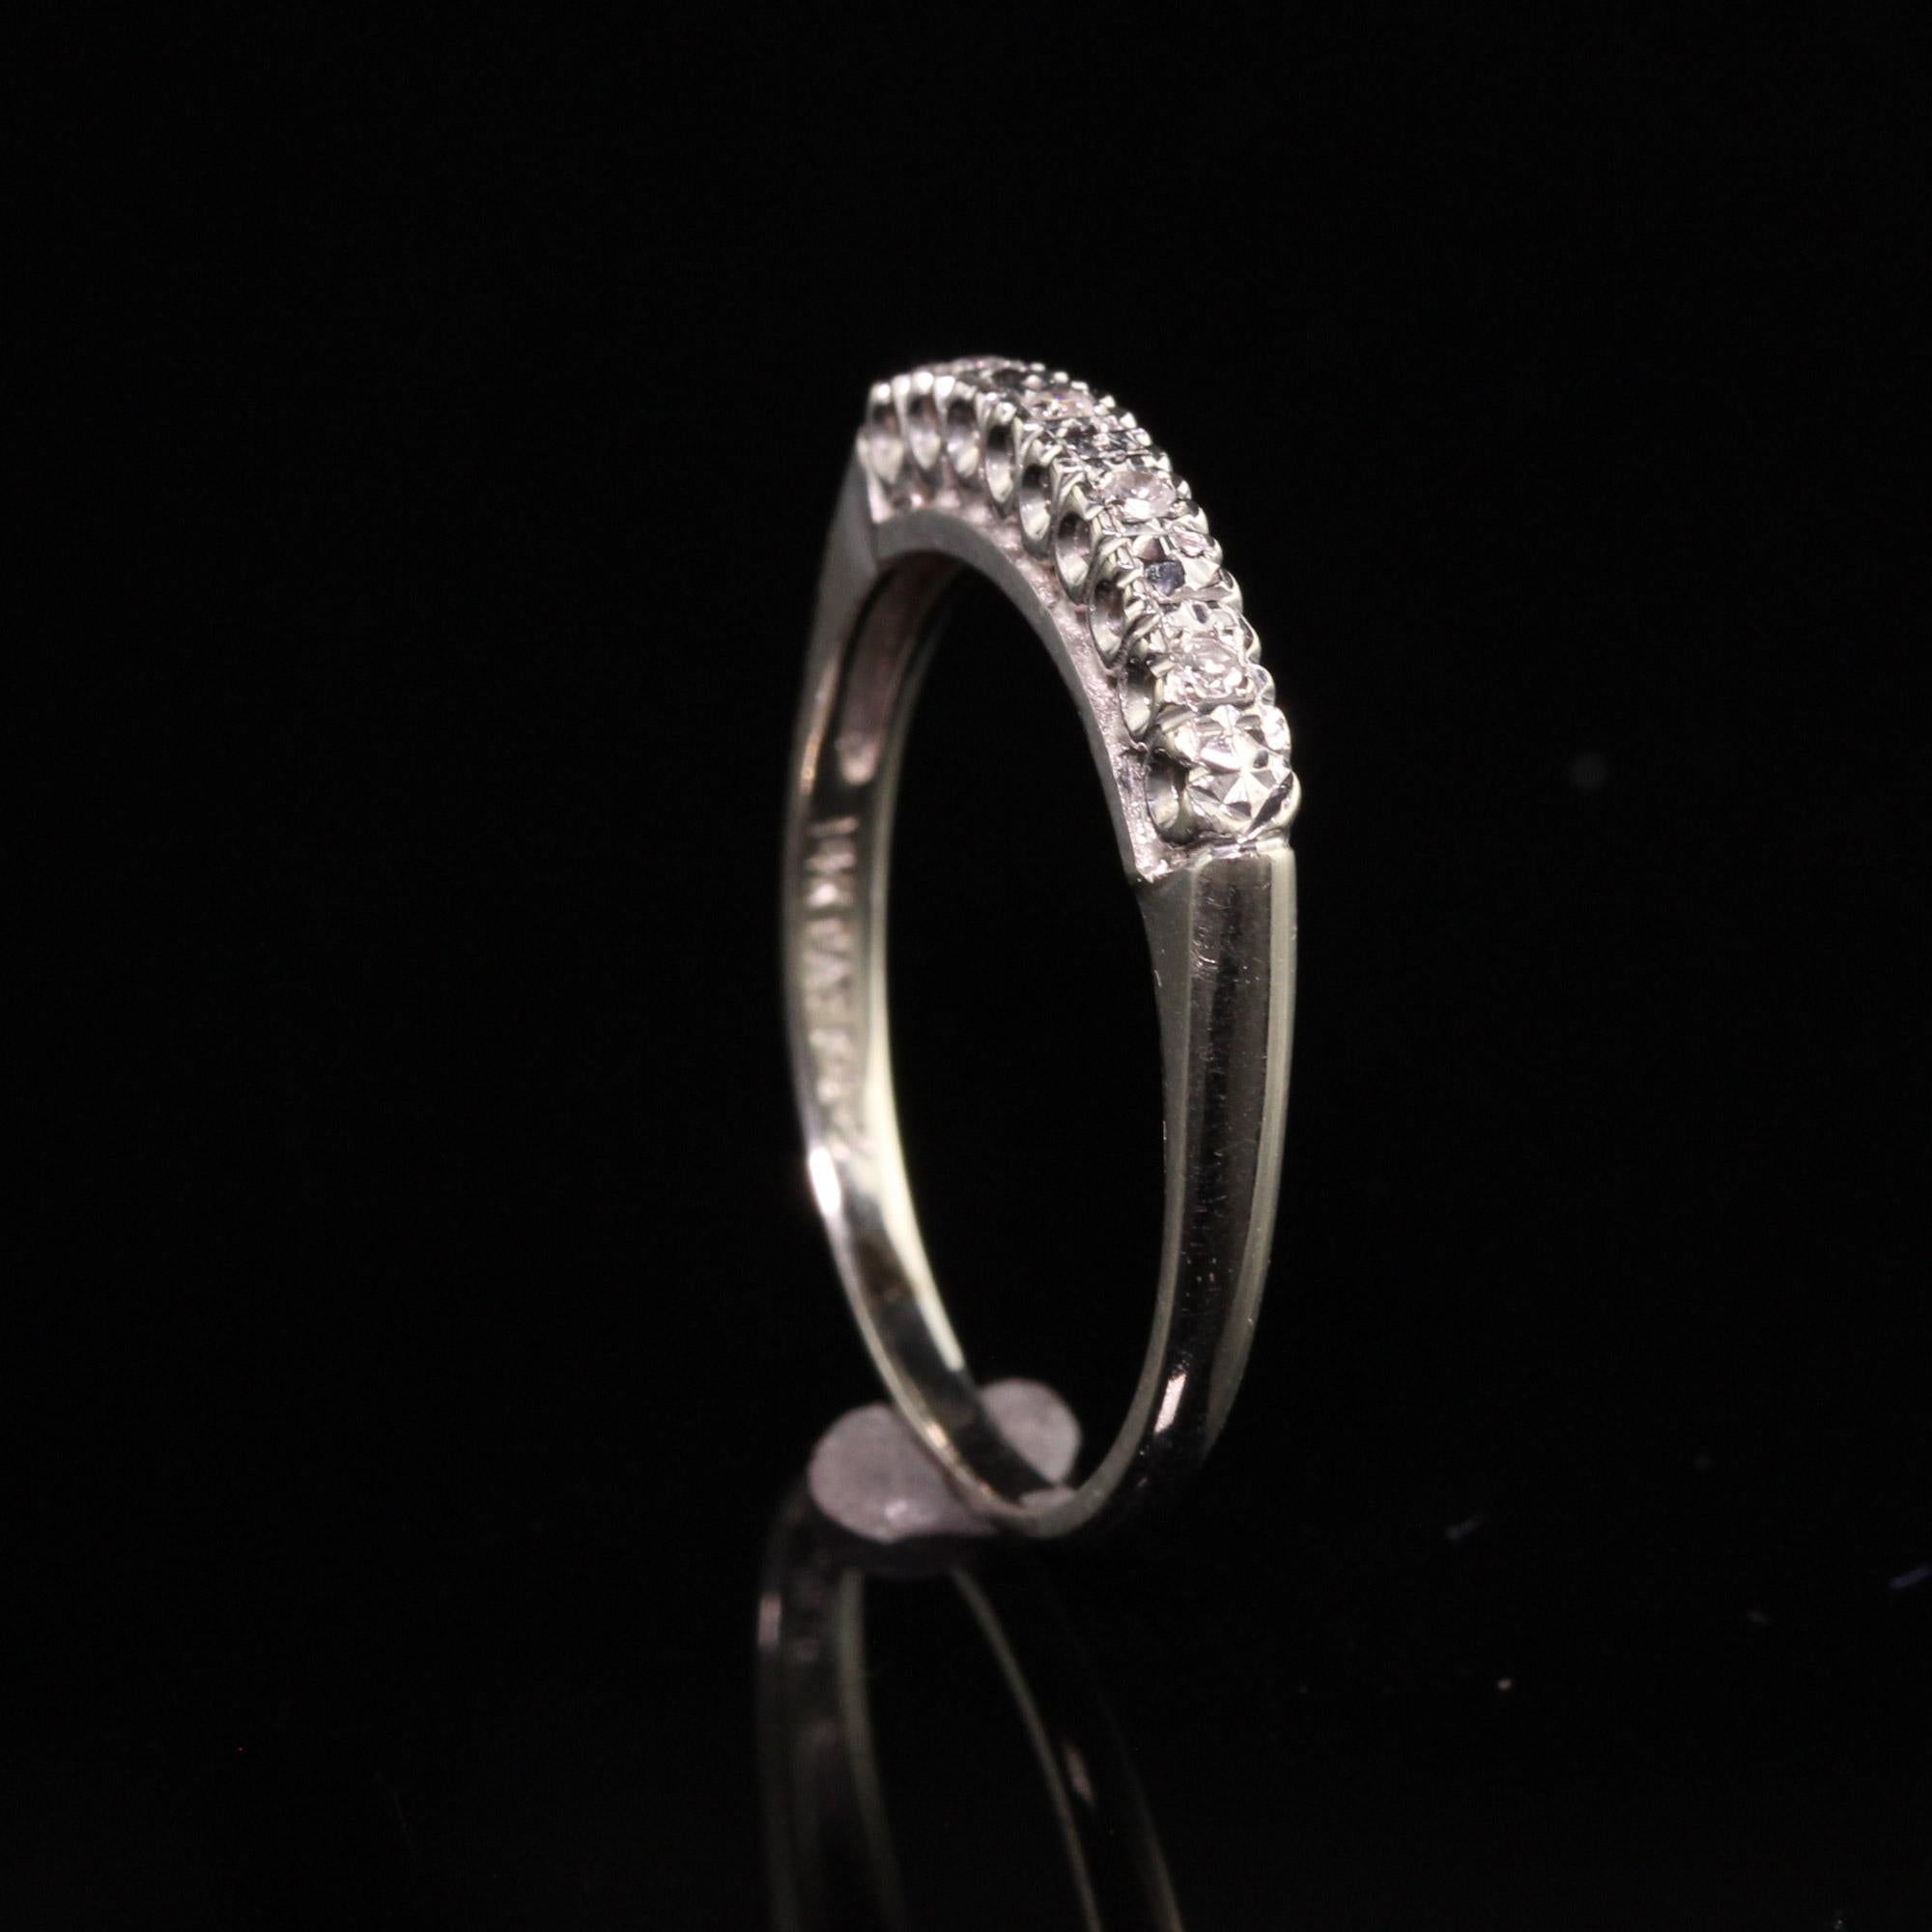 Vintage Estate 14K White Gold Single Cut Diamond Wedding Band In Good Condition For Sale In Great Neck, NY